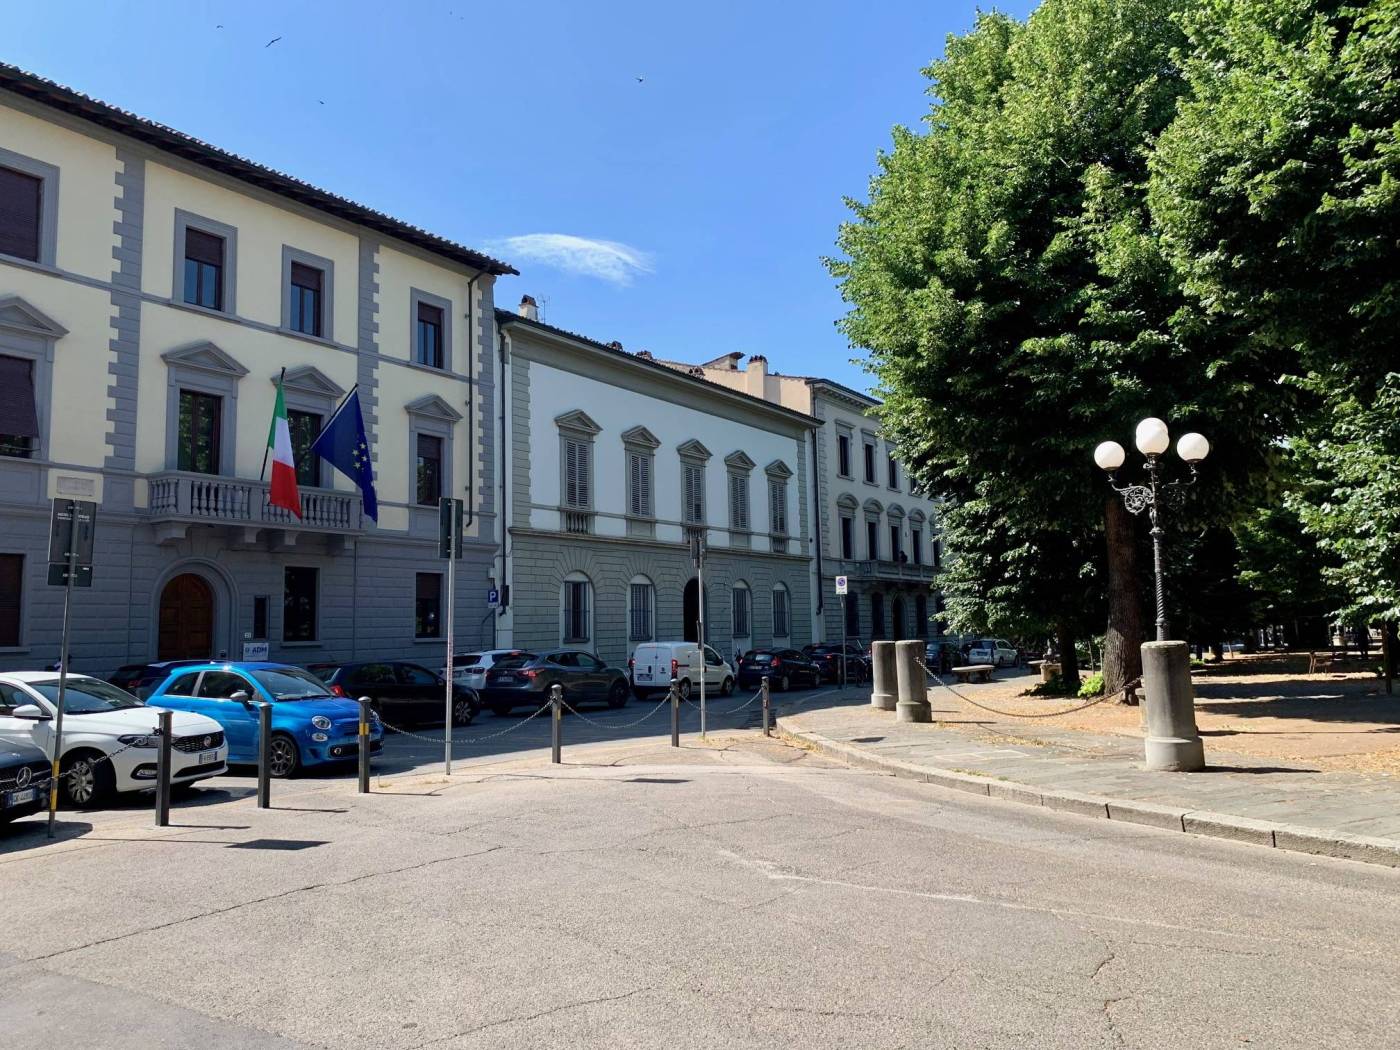 Piazza Indipendenza